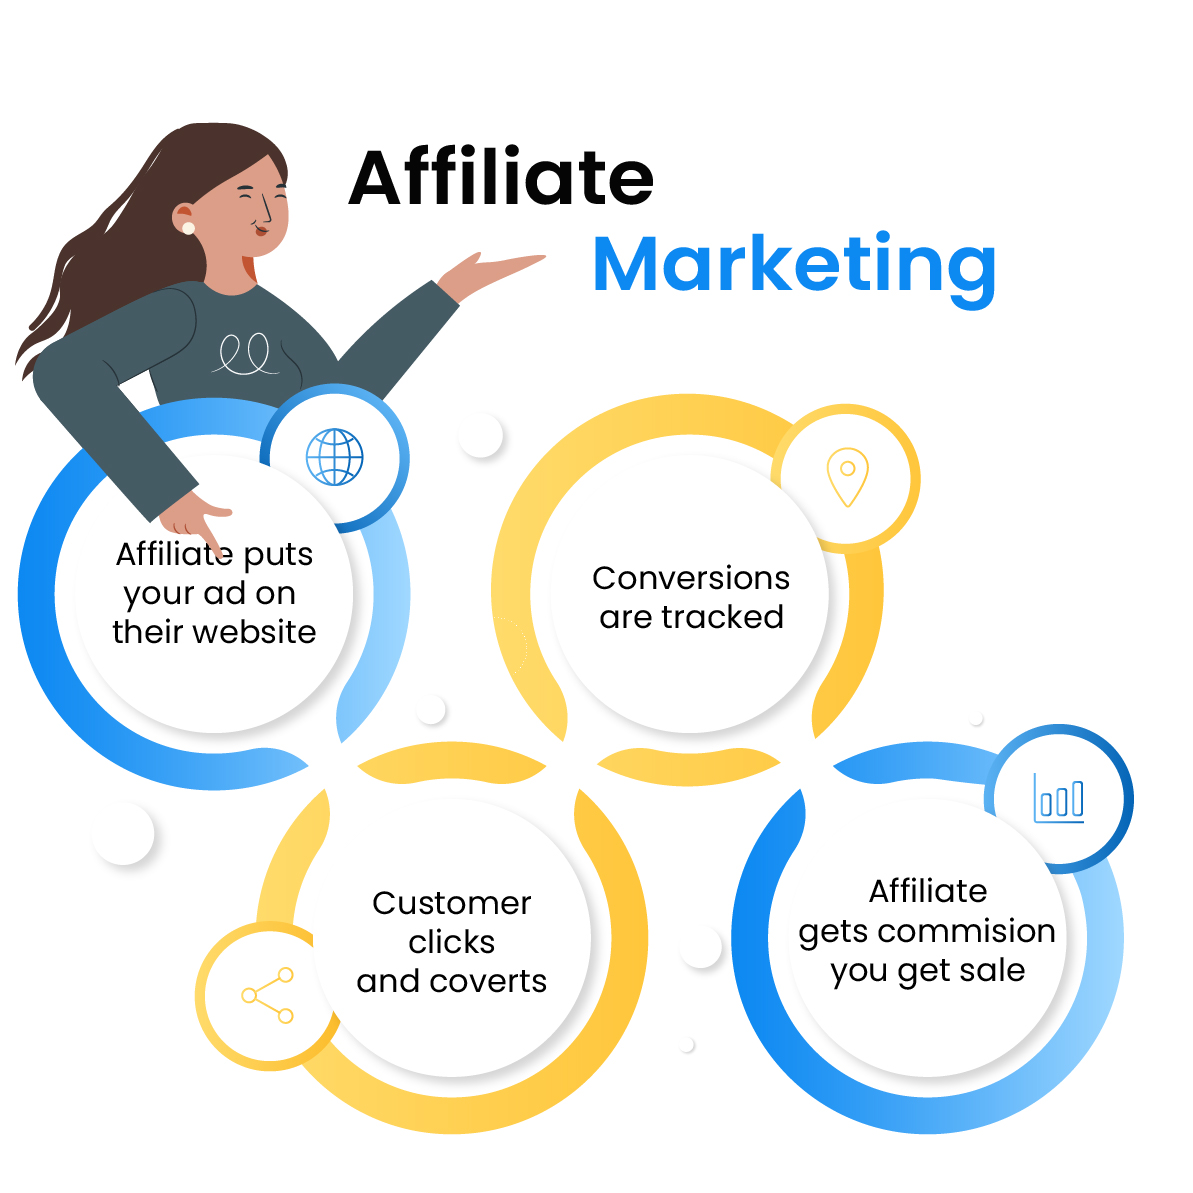 6 Things To Consider Before Starting An Affiliate Program